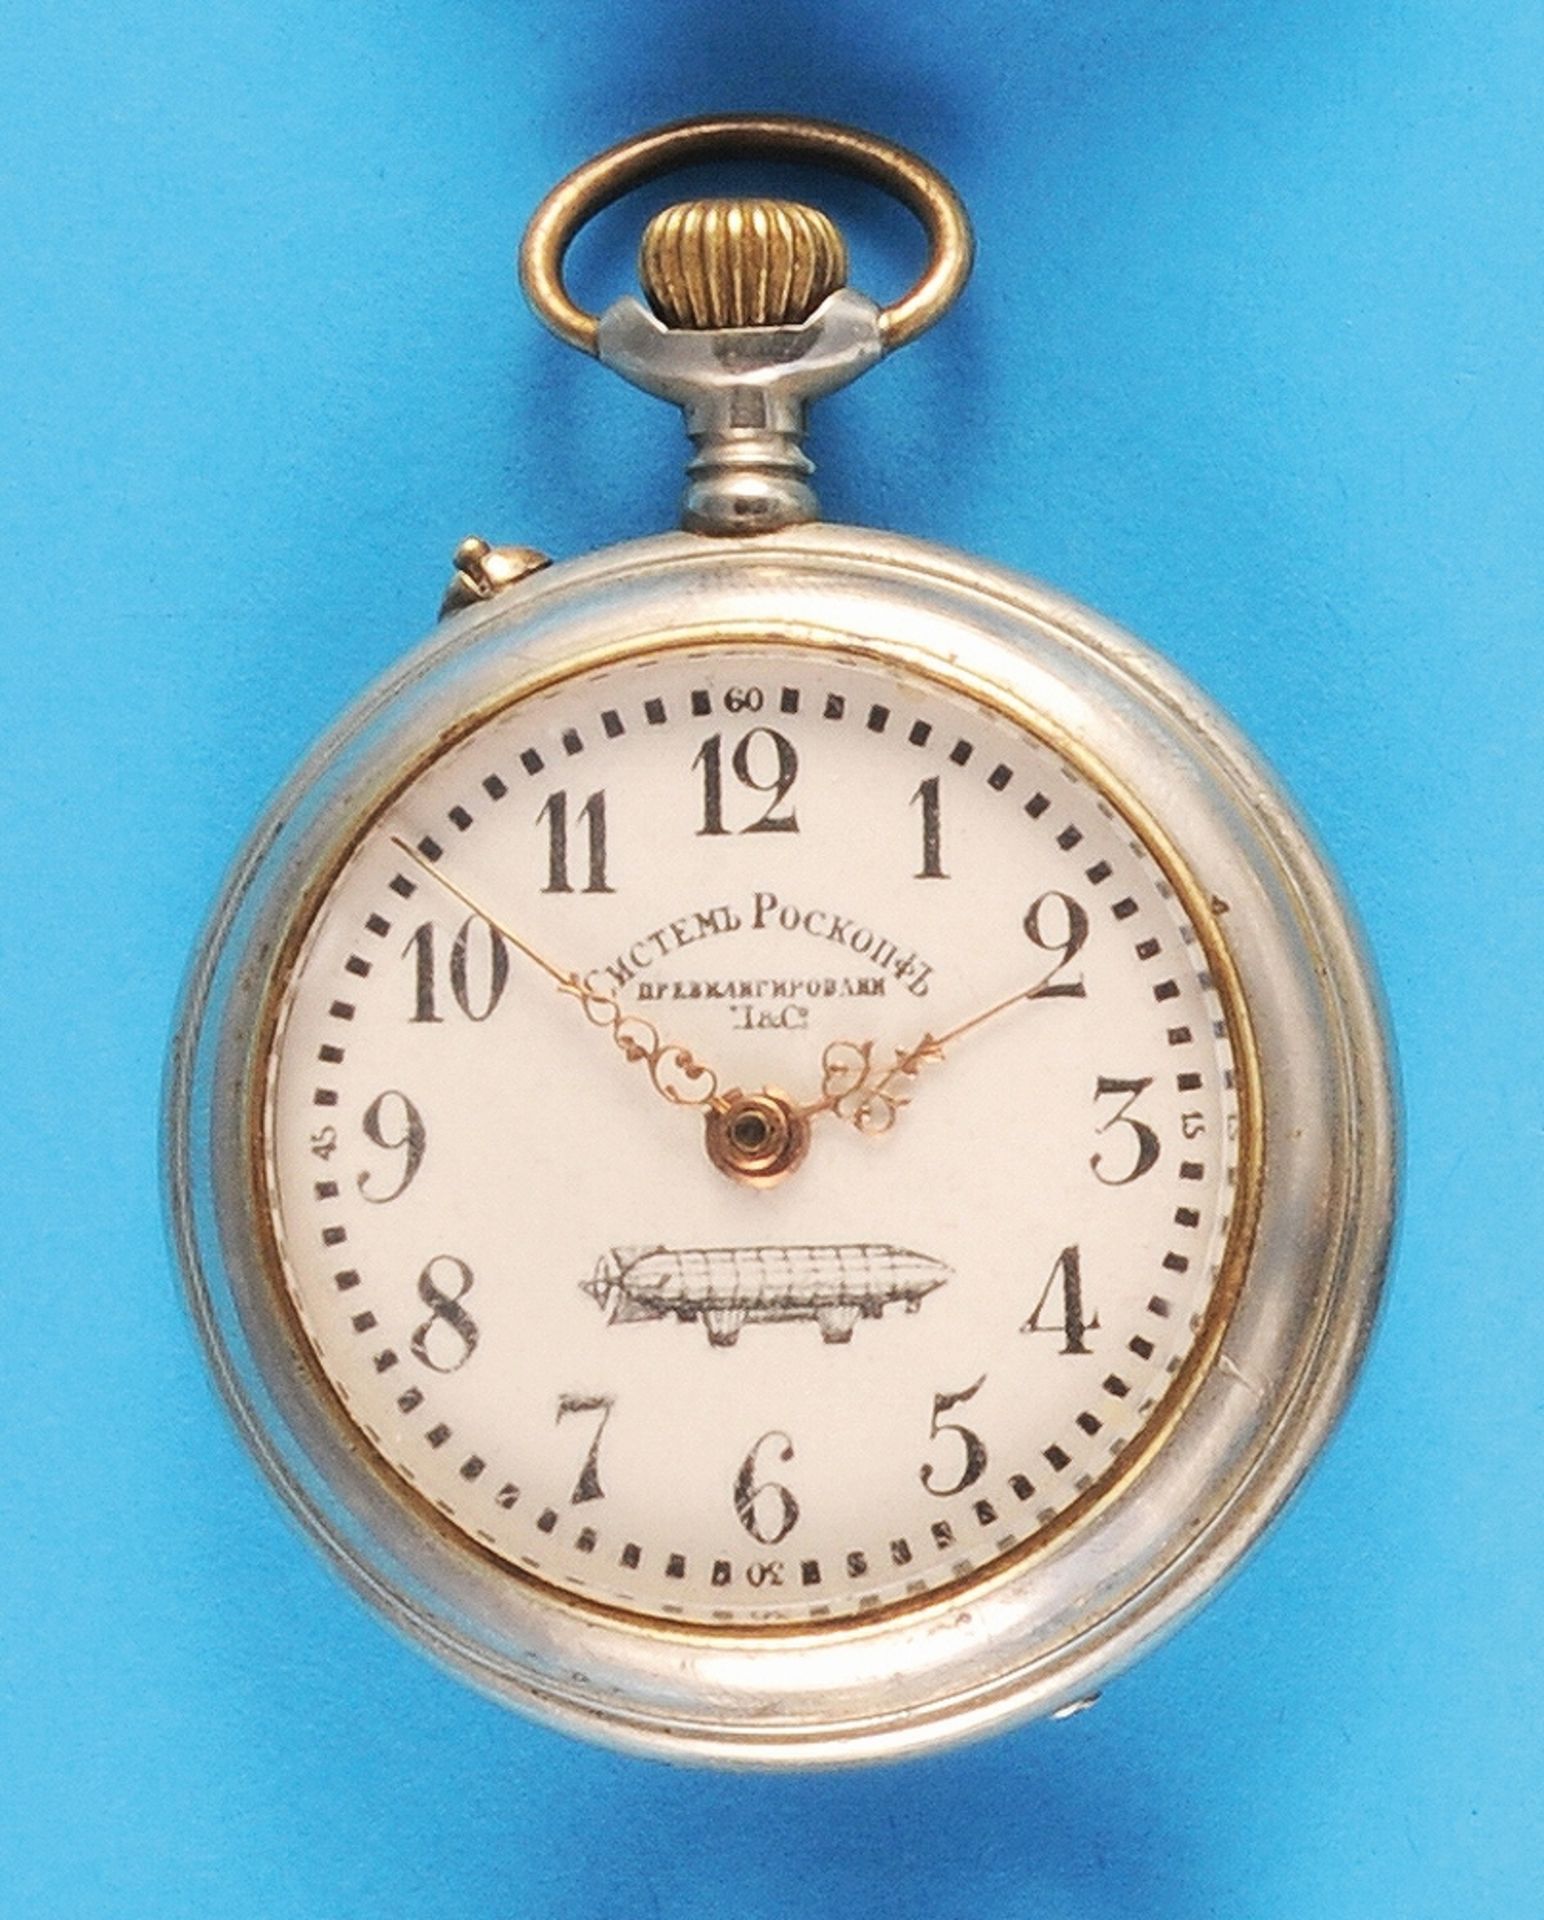 Roskopf pocket watch with zeppelin motif and signature with Cyrillic characters, - Image 2 of 2